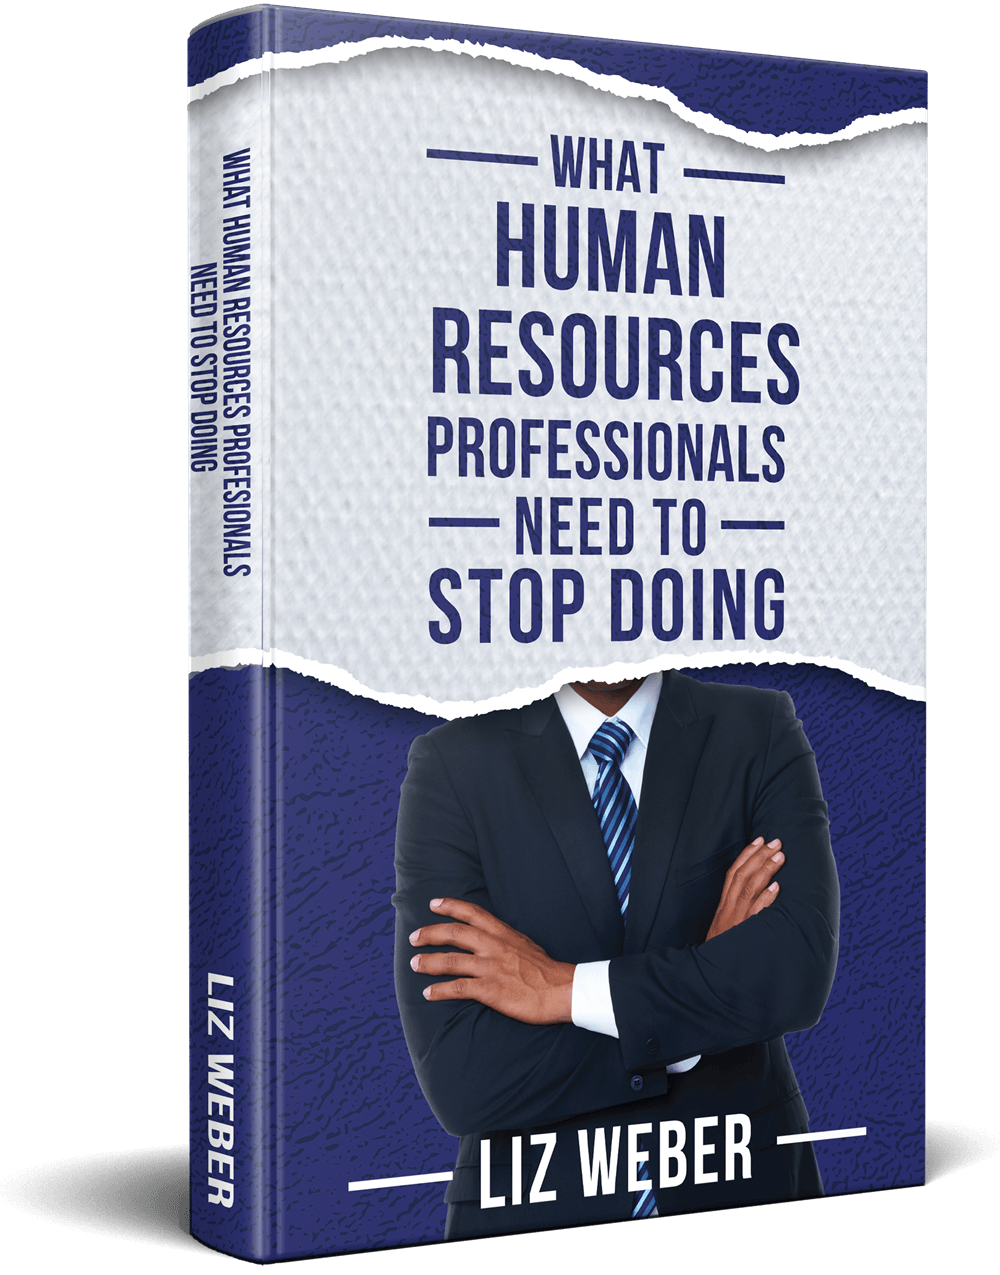 What Human Resources Professionals Need to Stop Doing